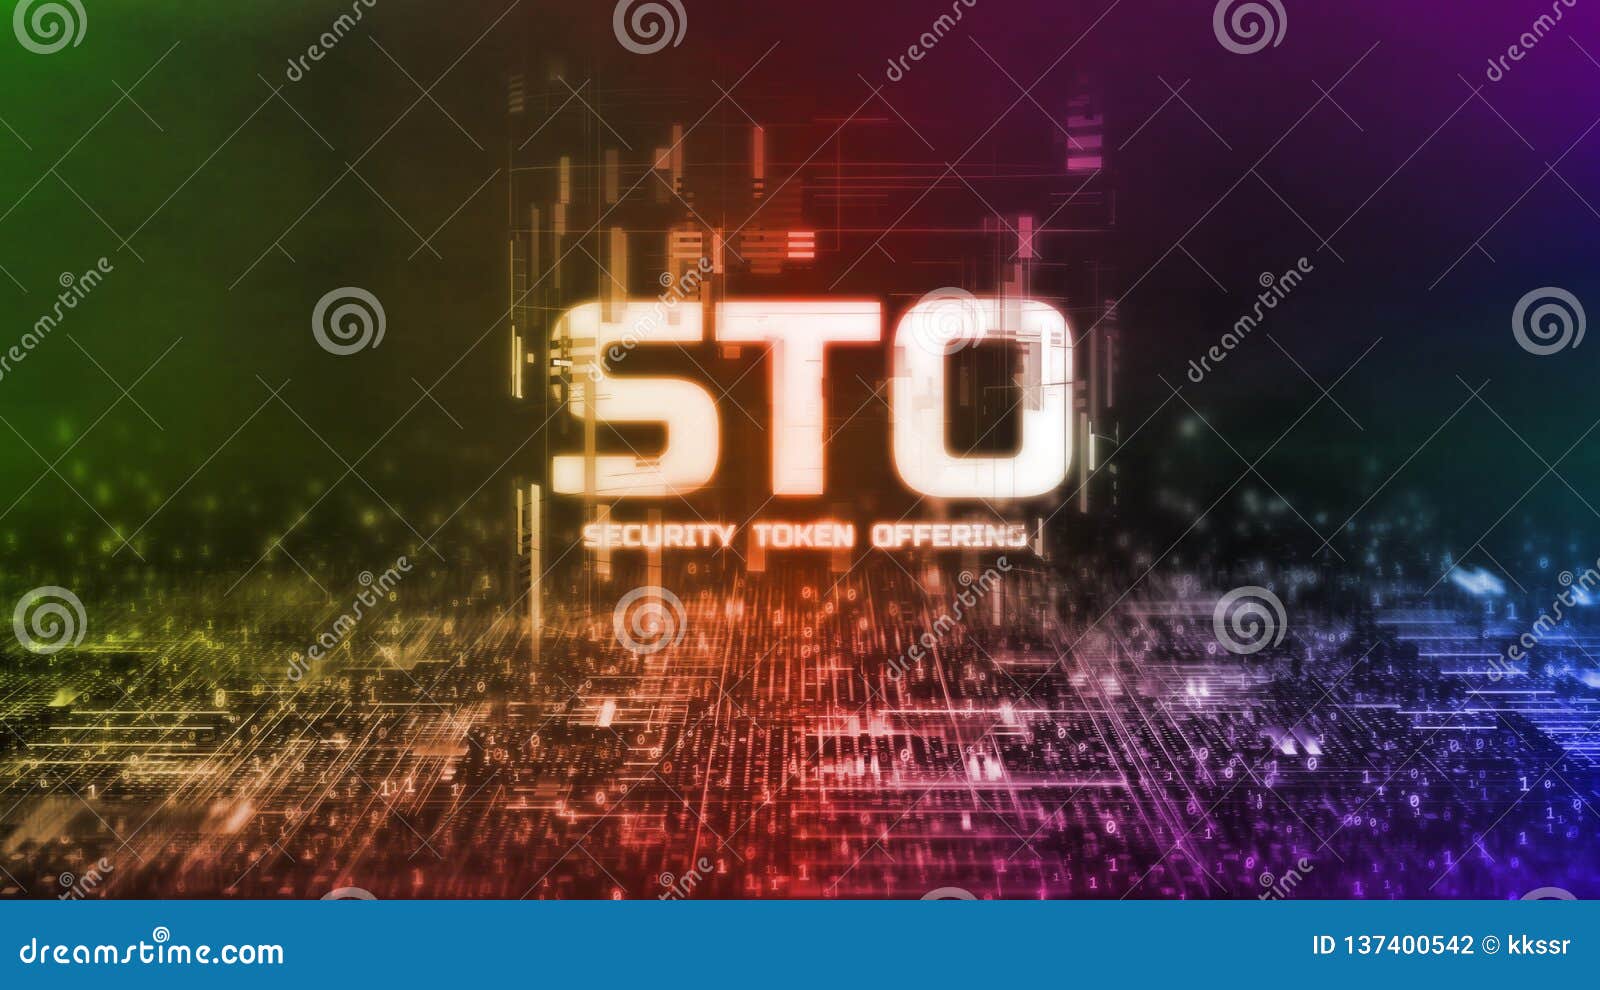 3d rendering of glowing security token offering sto text on abstract binary background. for crypto currency, token promoting,